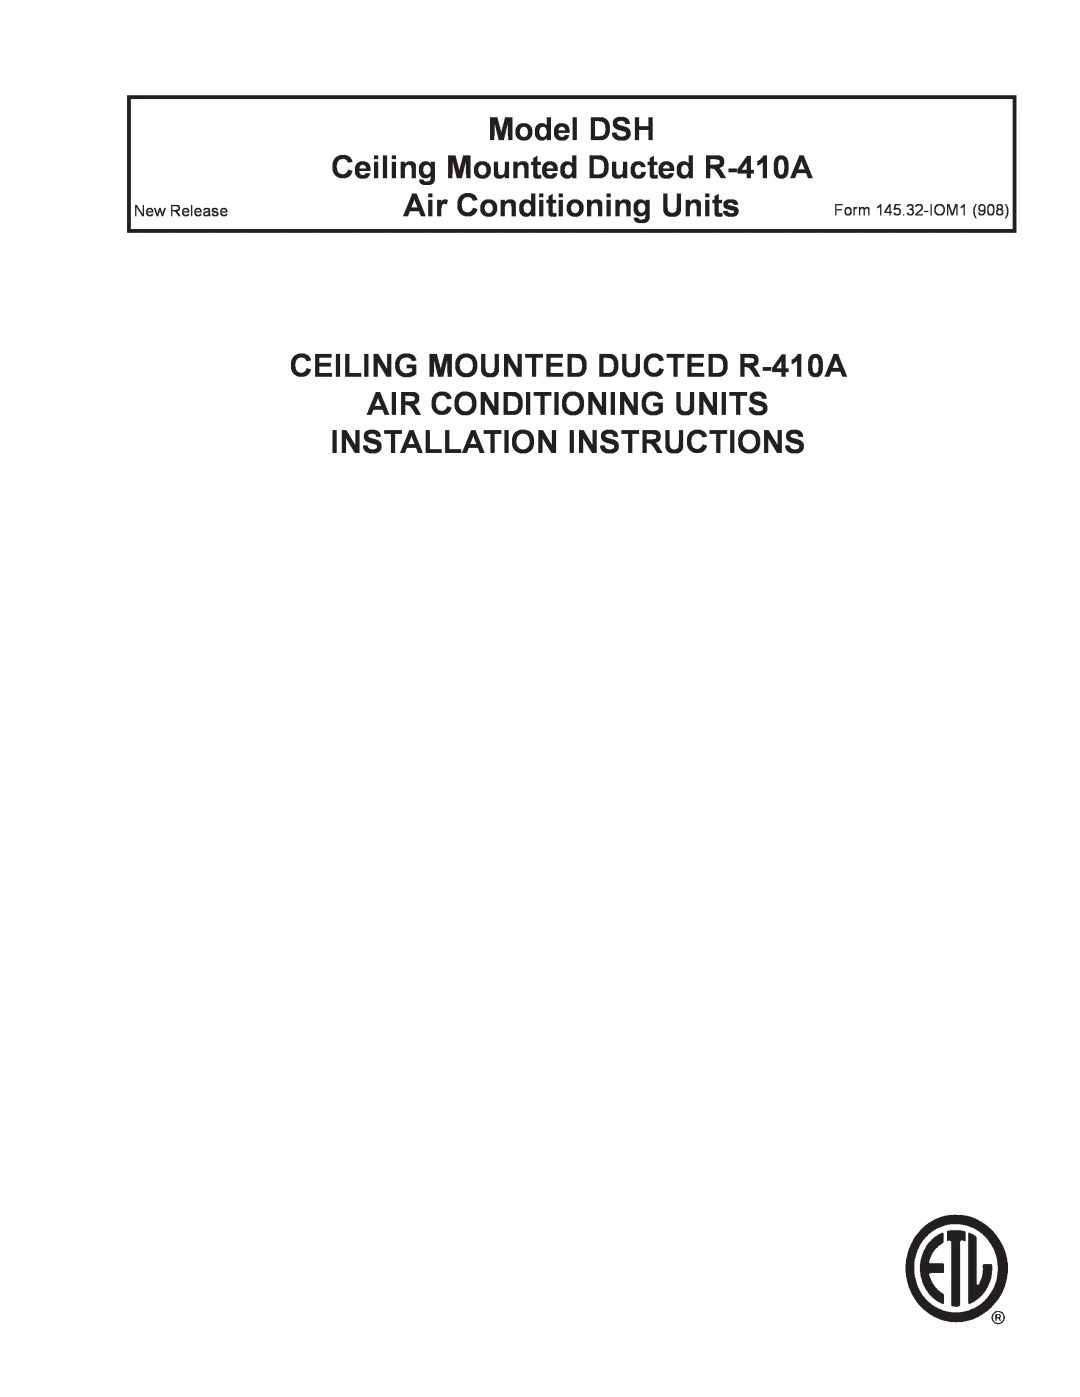 Energy Tech Laboratories installation instructions Model DSH Ceiling Mounted Ducted R-410A, Air Conditioning Units 